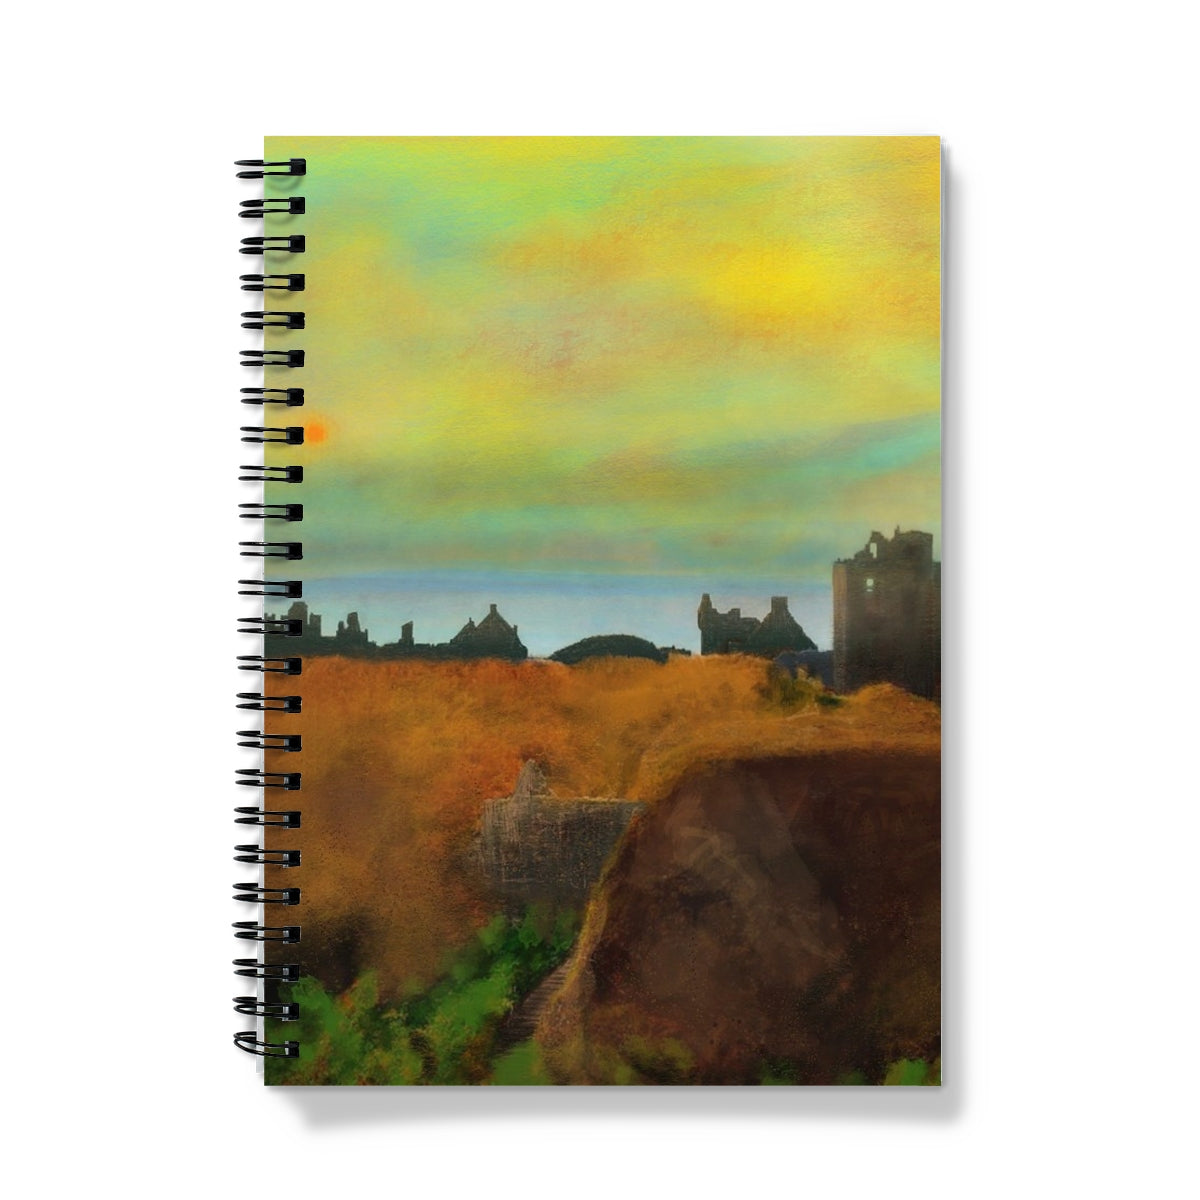 Dunnottar Castle Art Gifts Notebook-Journals & Notebooks-Historic & Iconic Scotland Art Gallery-A4-Lined-Paintings, Prints, Homeware, Art Gifts From Scotland By Scottish Artist Kevin Hunter